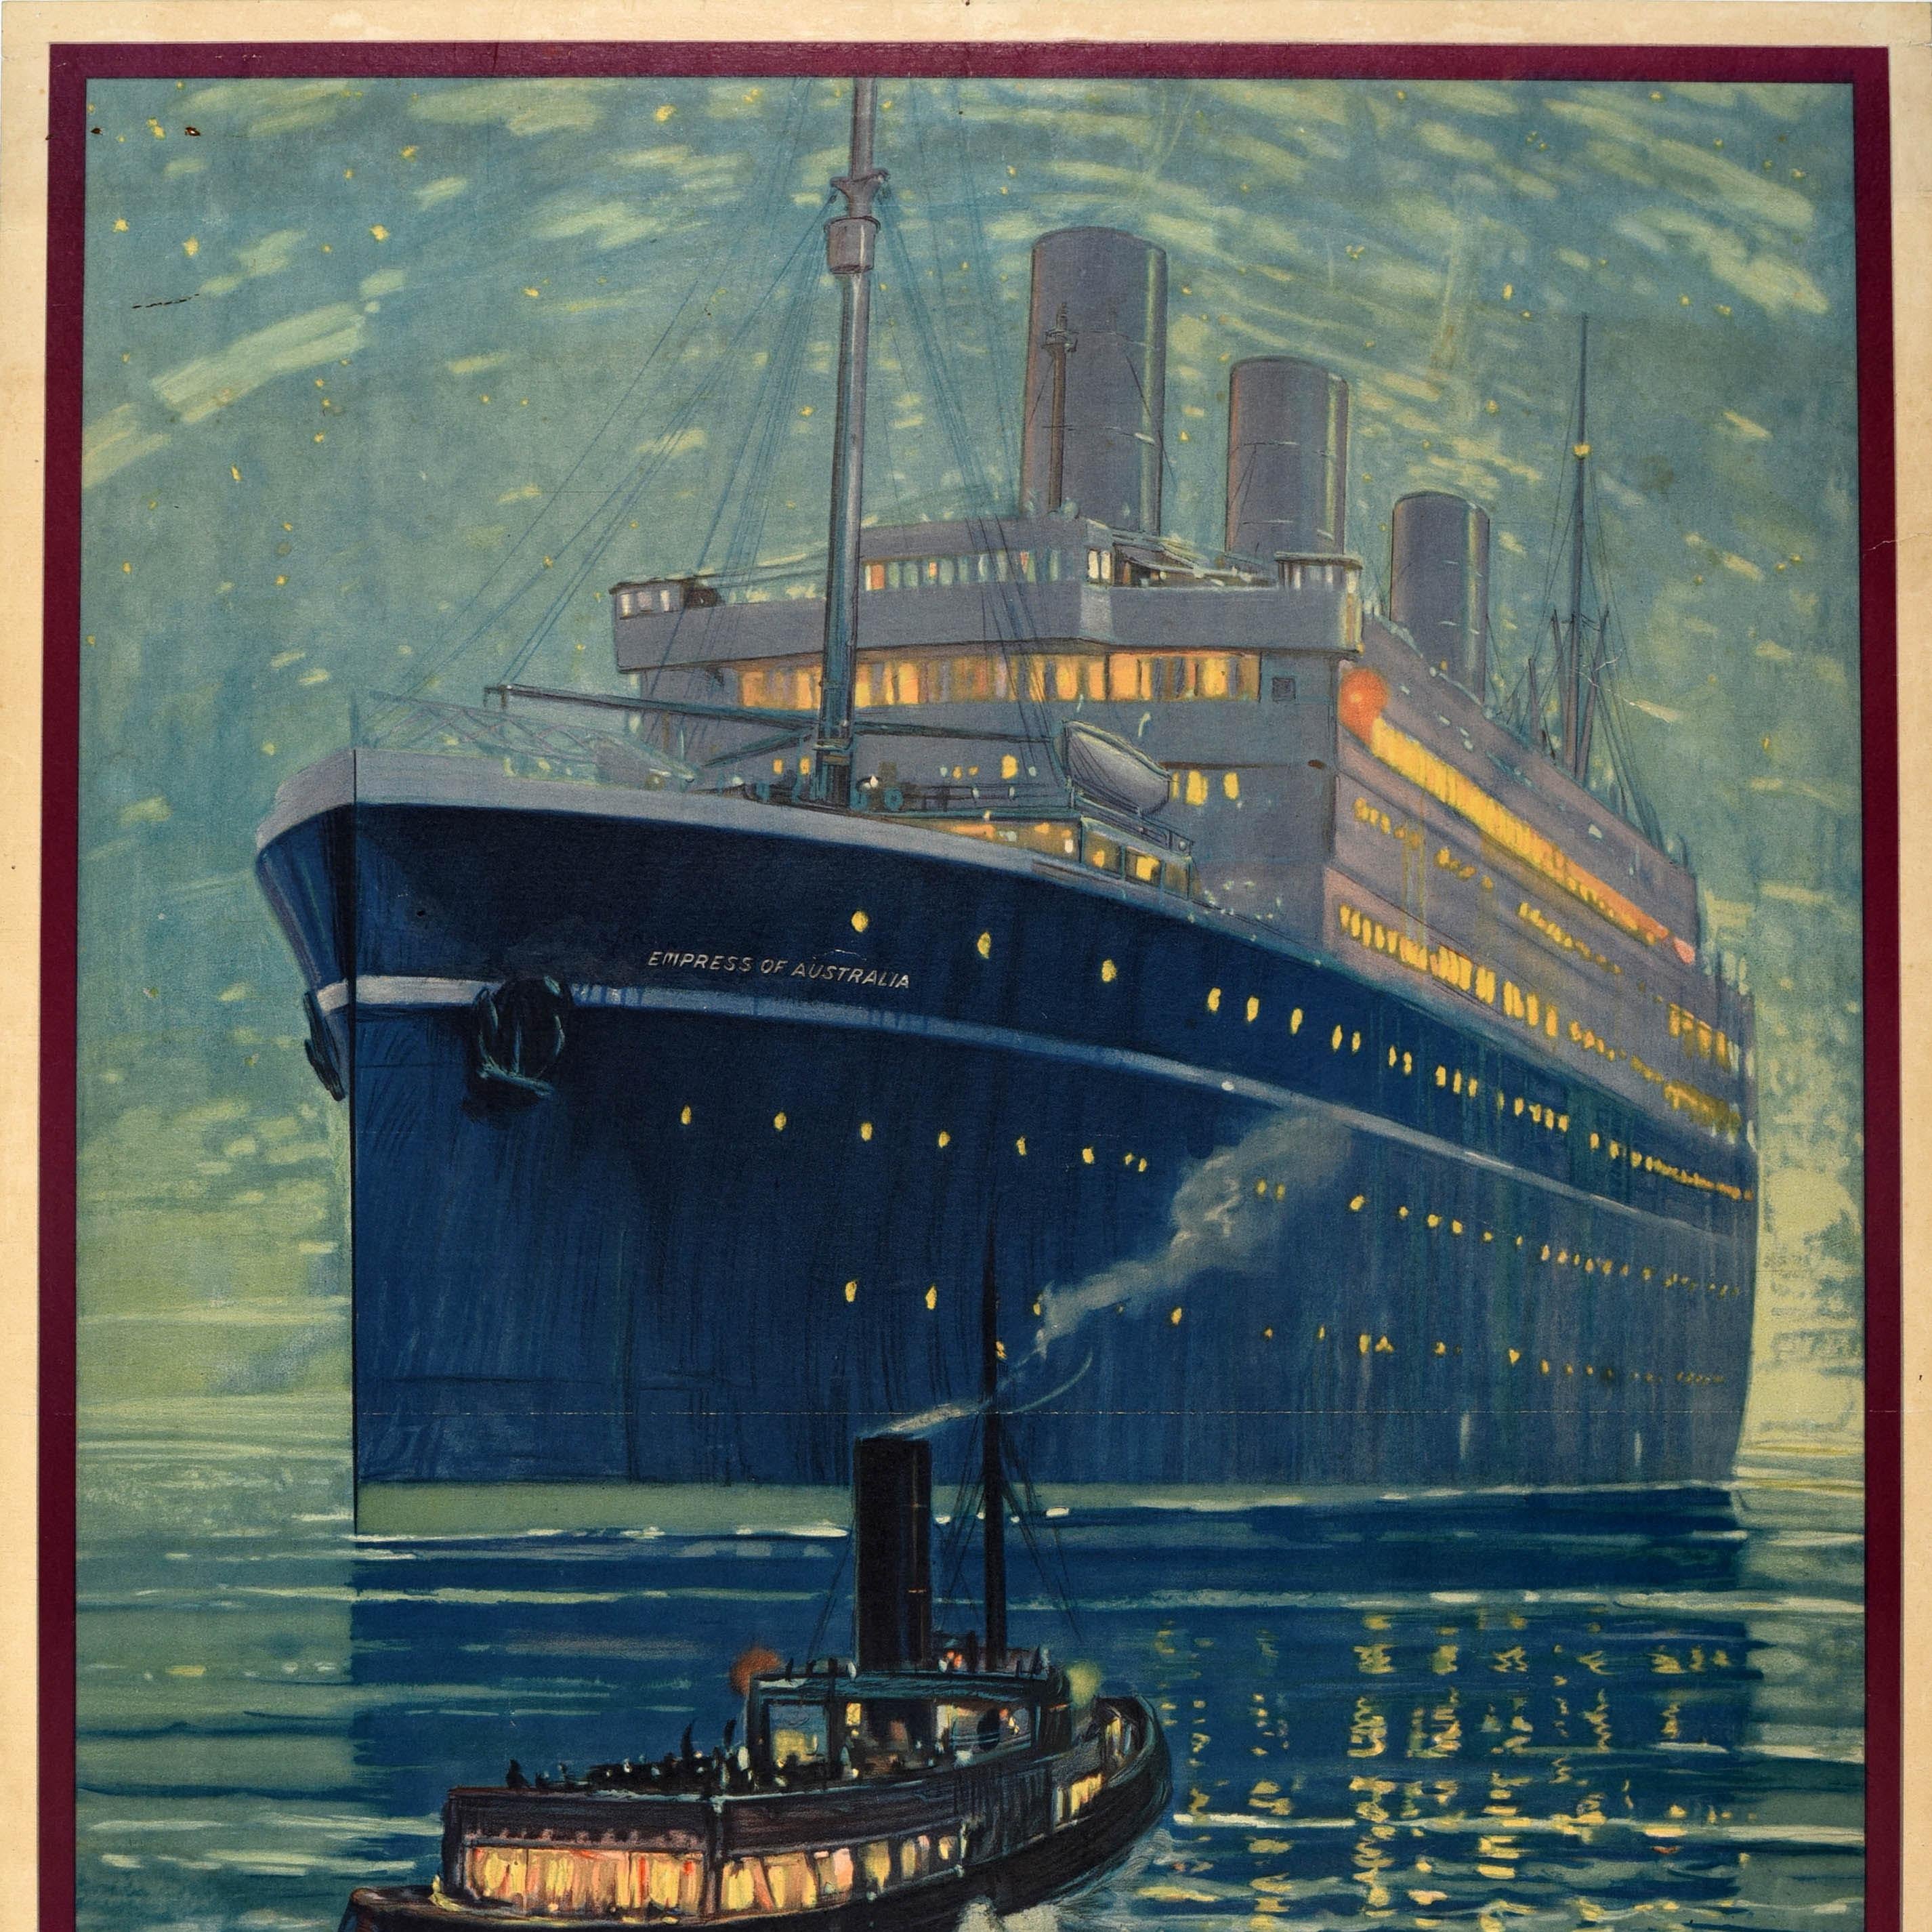 Original Vintage Cruise Ship Travel Poster Canadian Pacific Empress Of Australia - Gray Print by Unknown